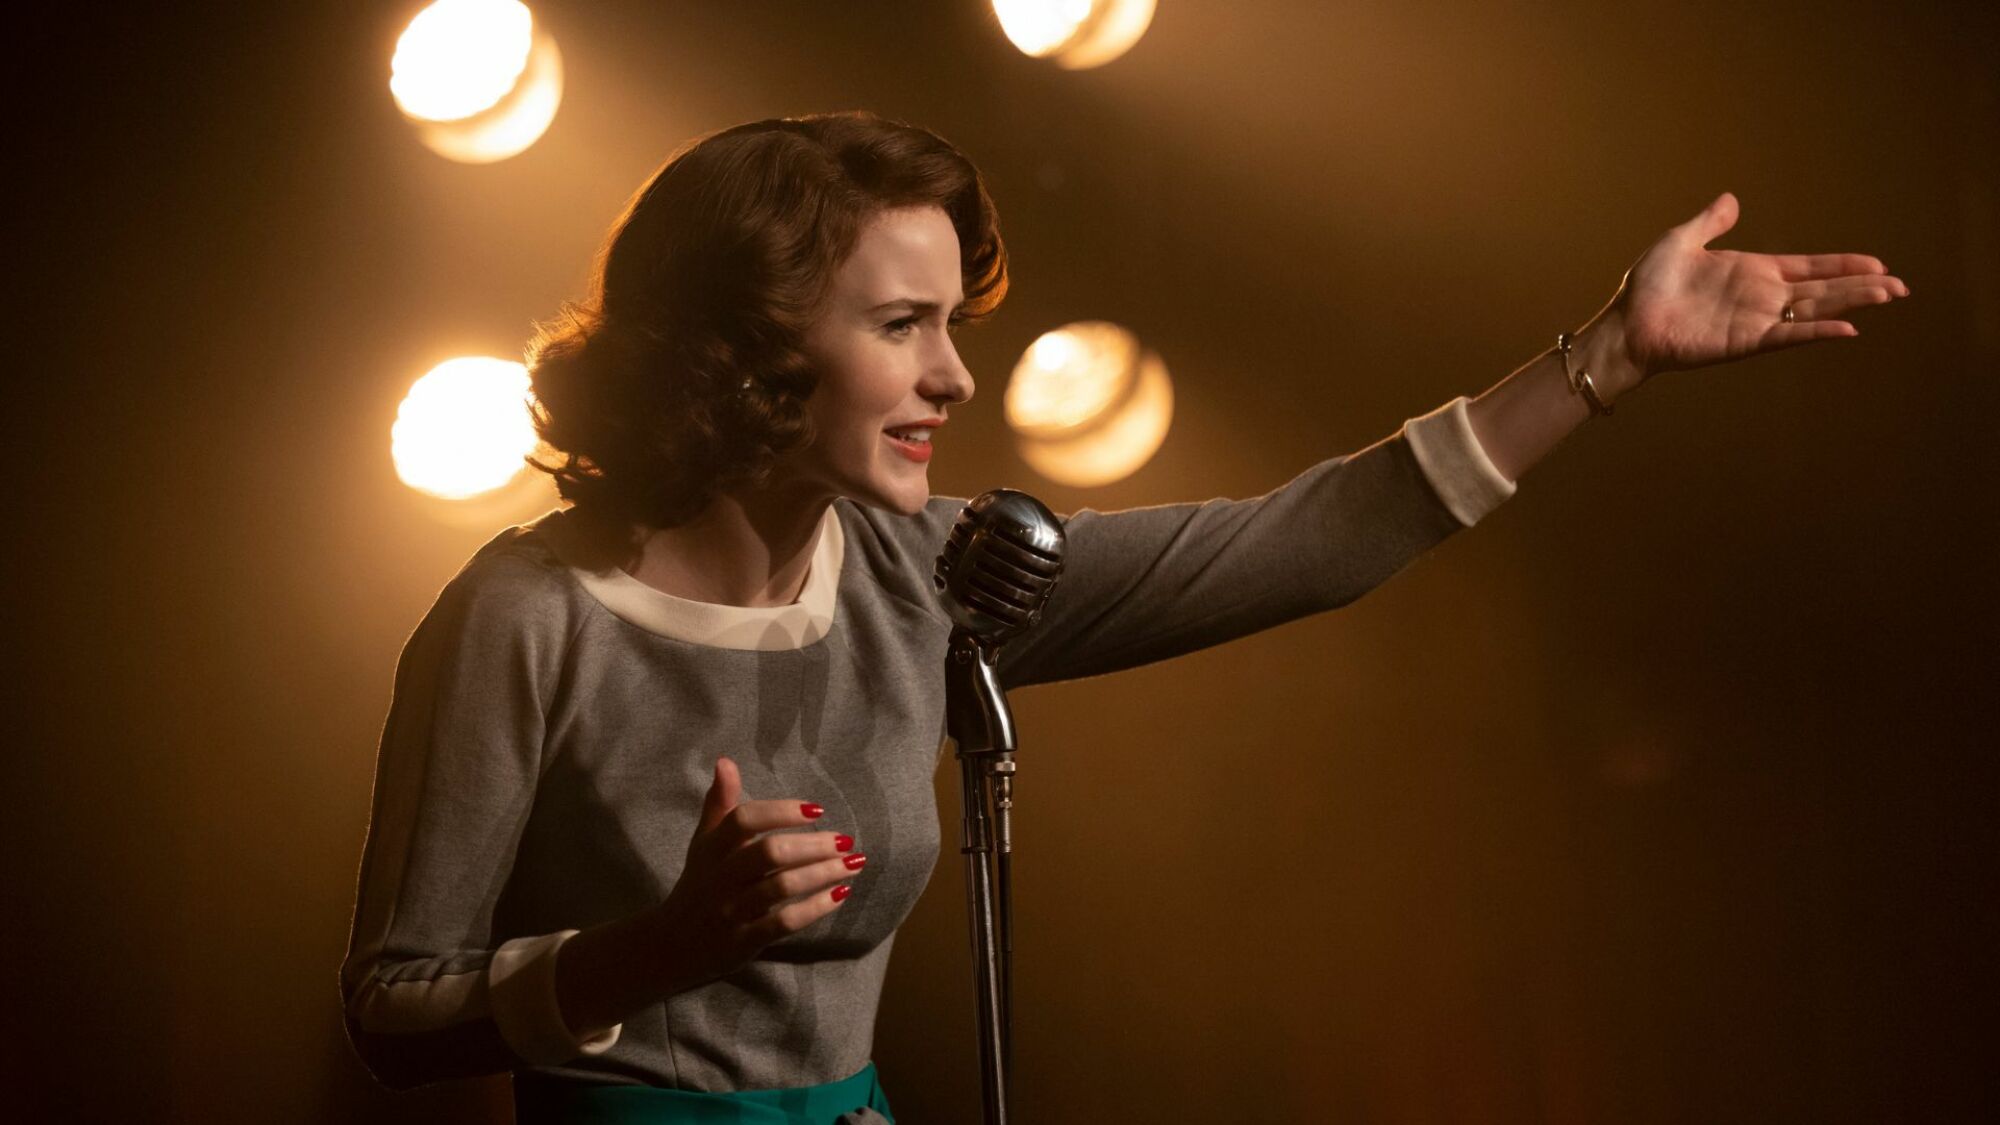 Rachel Brosnahan  as Miriam 'Midge' Maisel performing stand-up in "The Marvelous Mrs. Maisel."